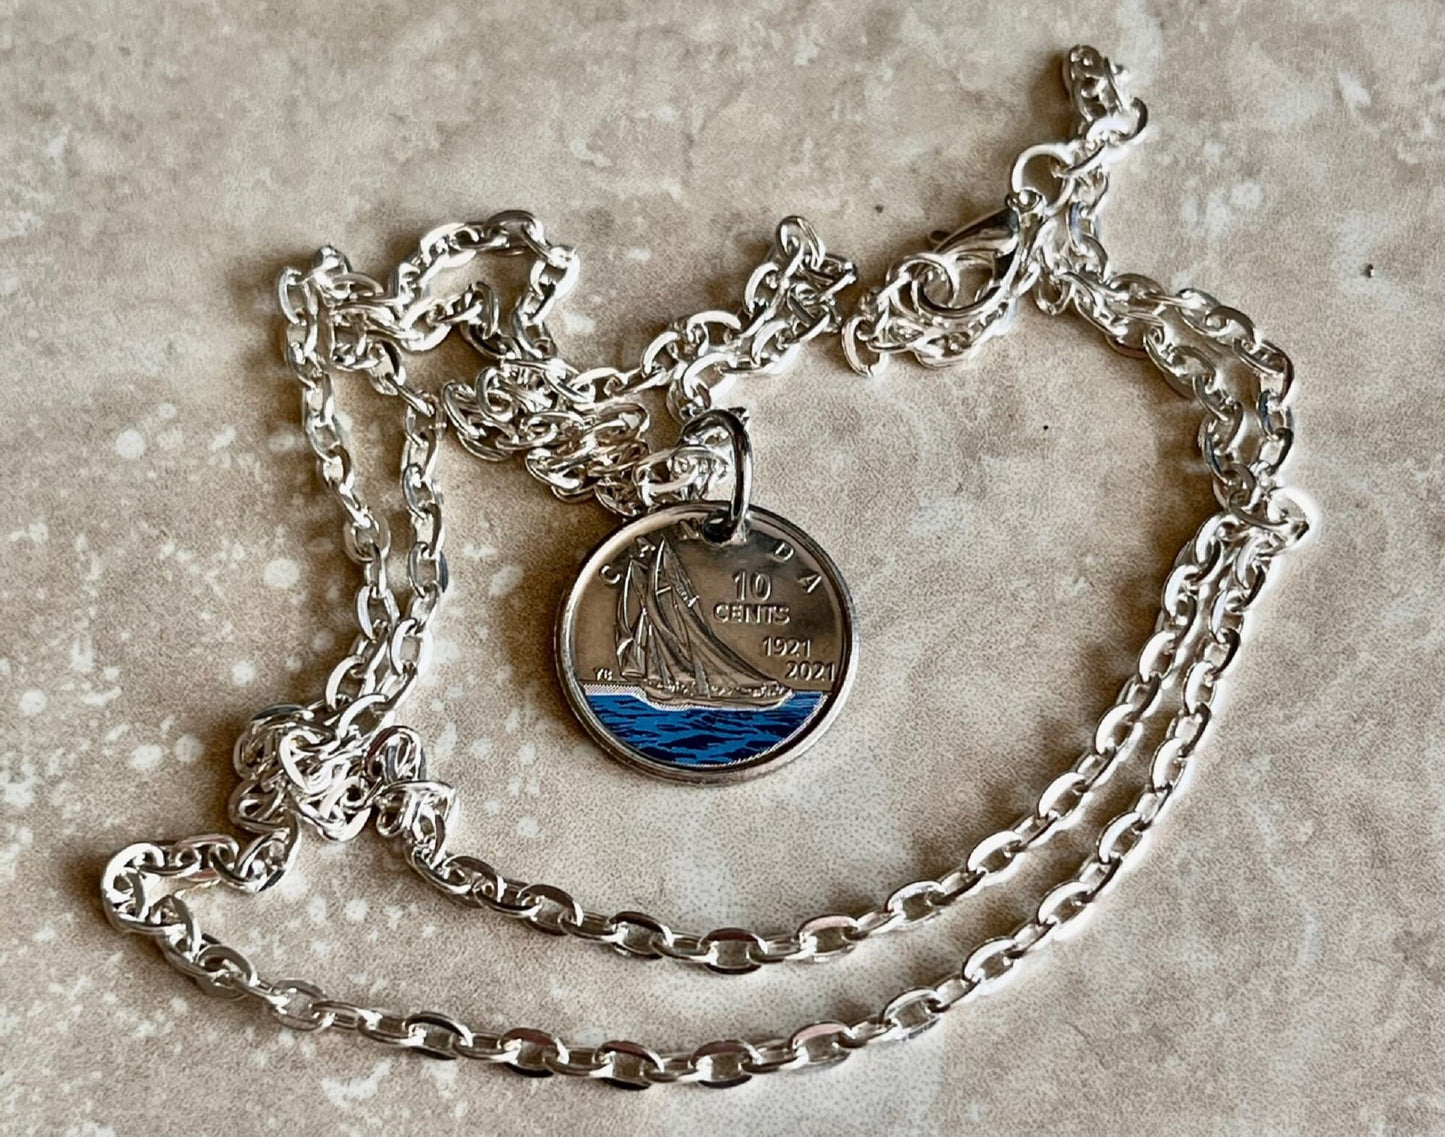 Canadian Dime Coin Pendant Necklace 1921-2021 Blue 10 Cents Necklace Jewelry Charm Gift Friend Charm Gift For Him, Her World Coins Collector